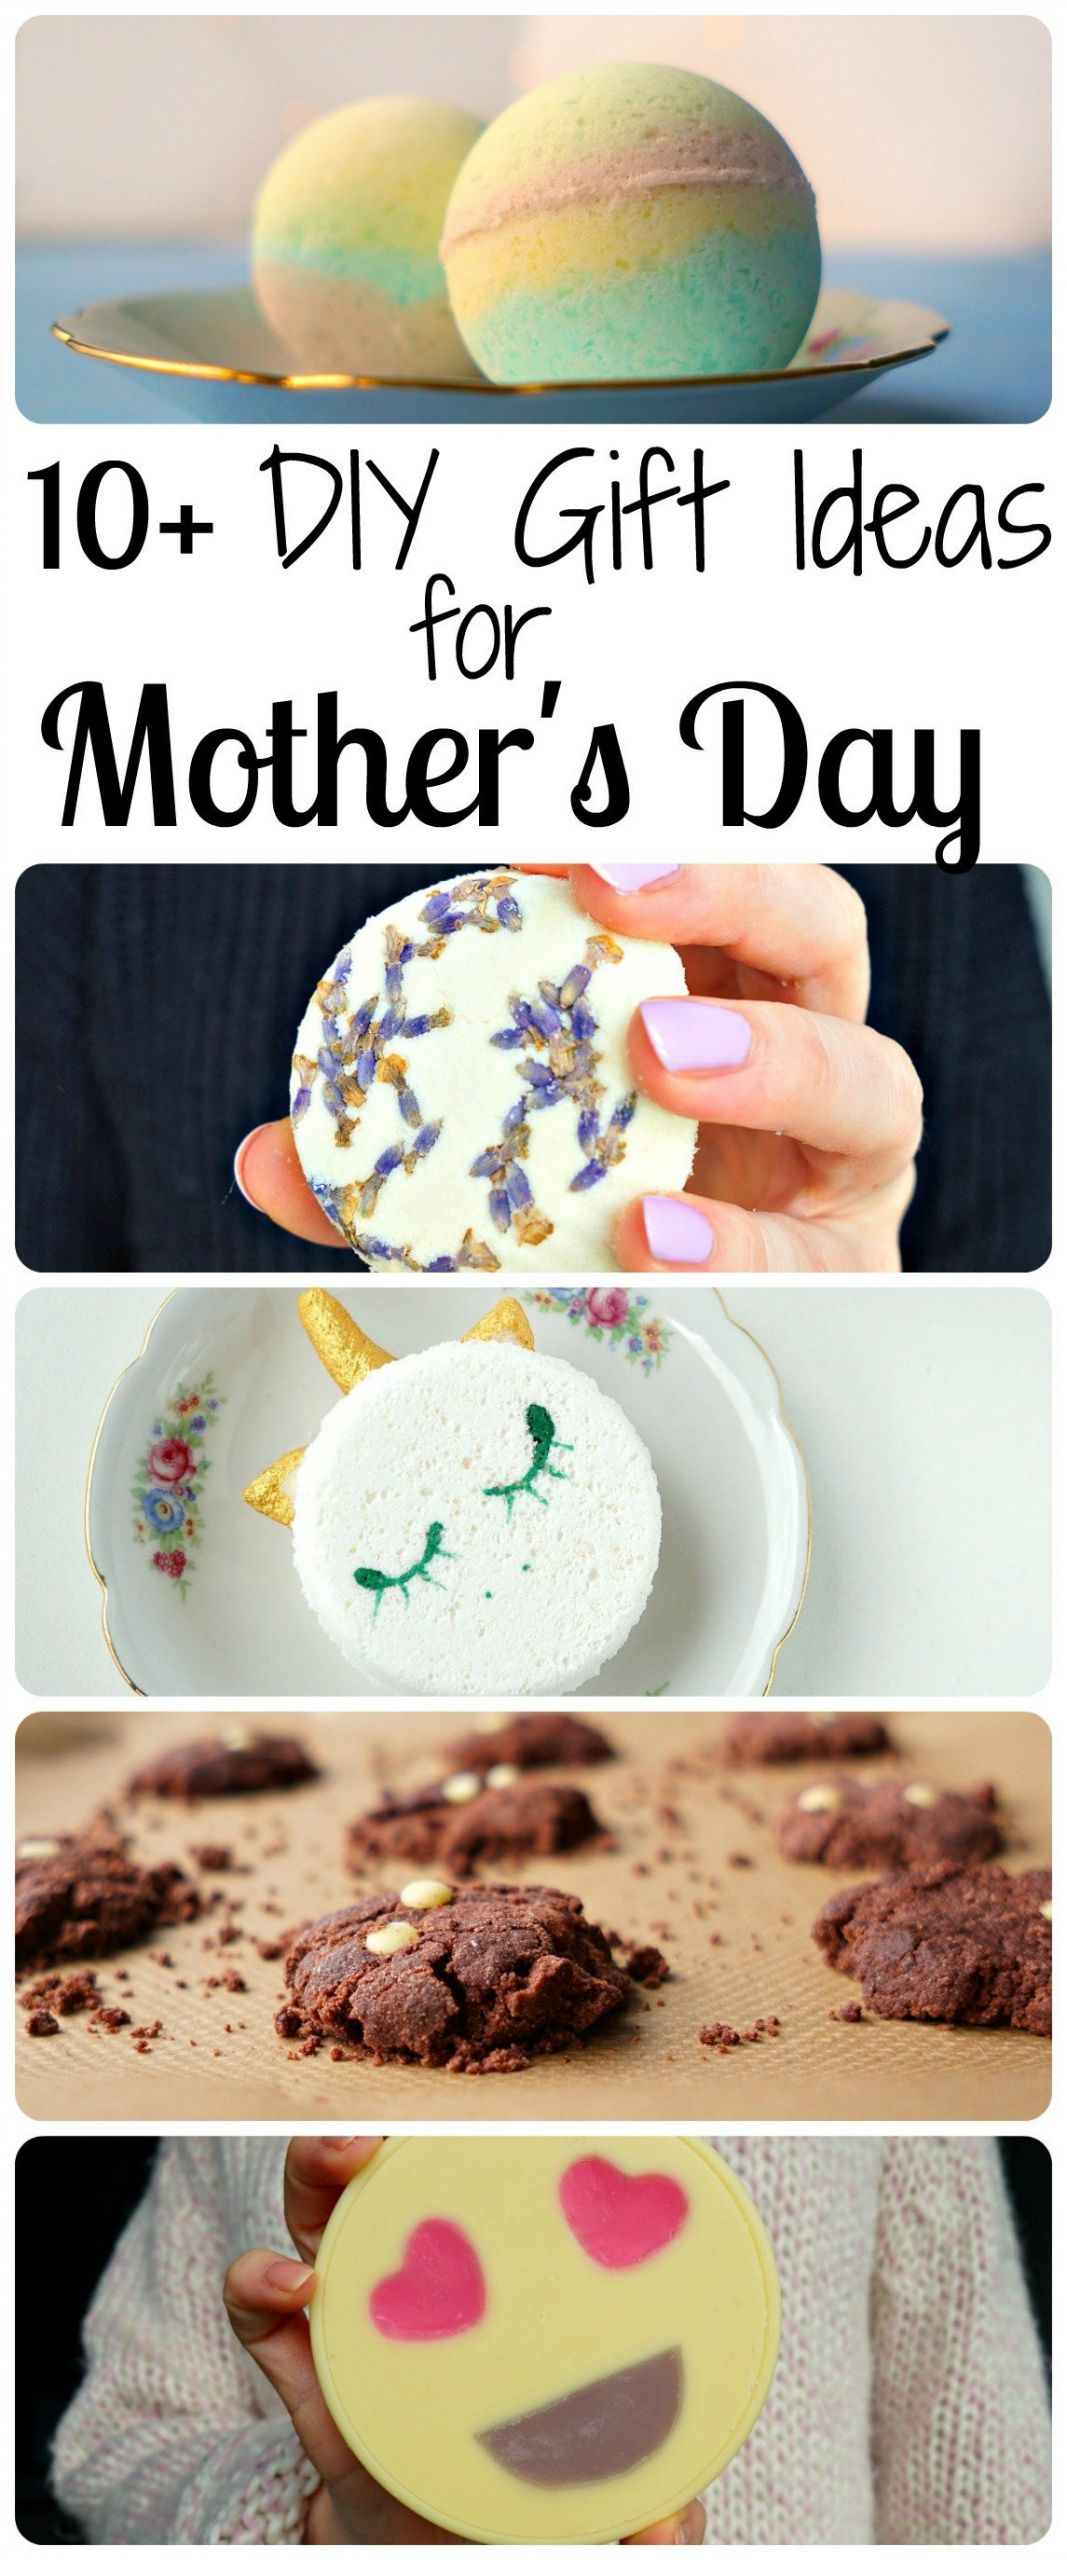 Handmade Mother'S Day Gift Ideas
 30 Gift Ideas for Mother s Day to Buy or DIY The Makeup